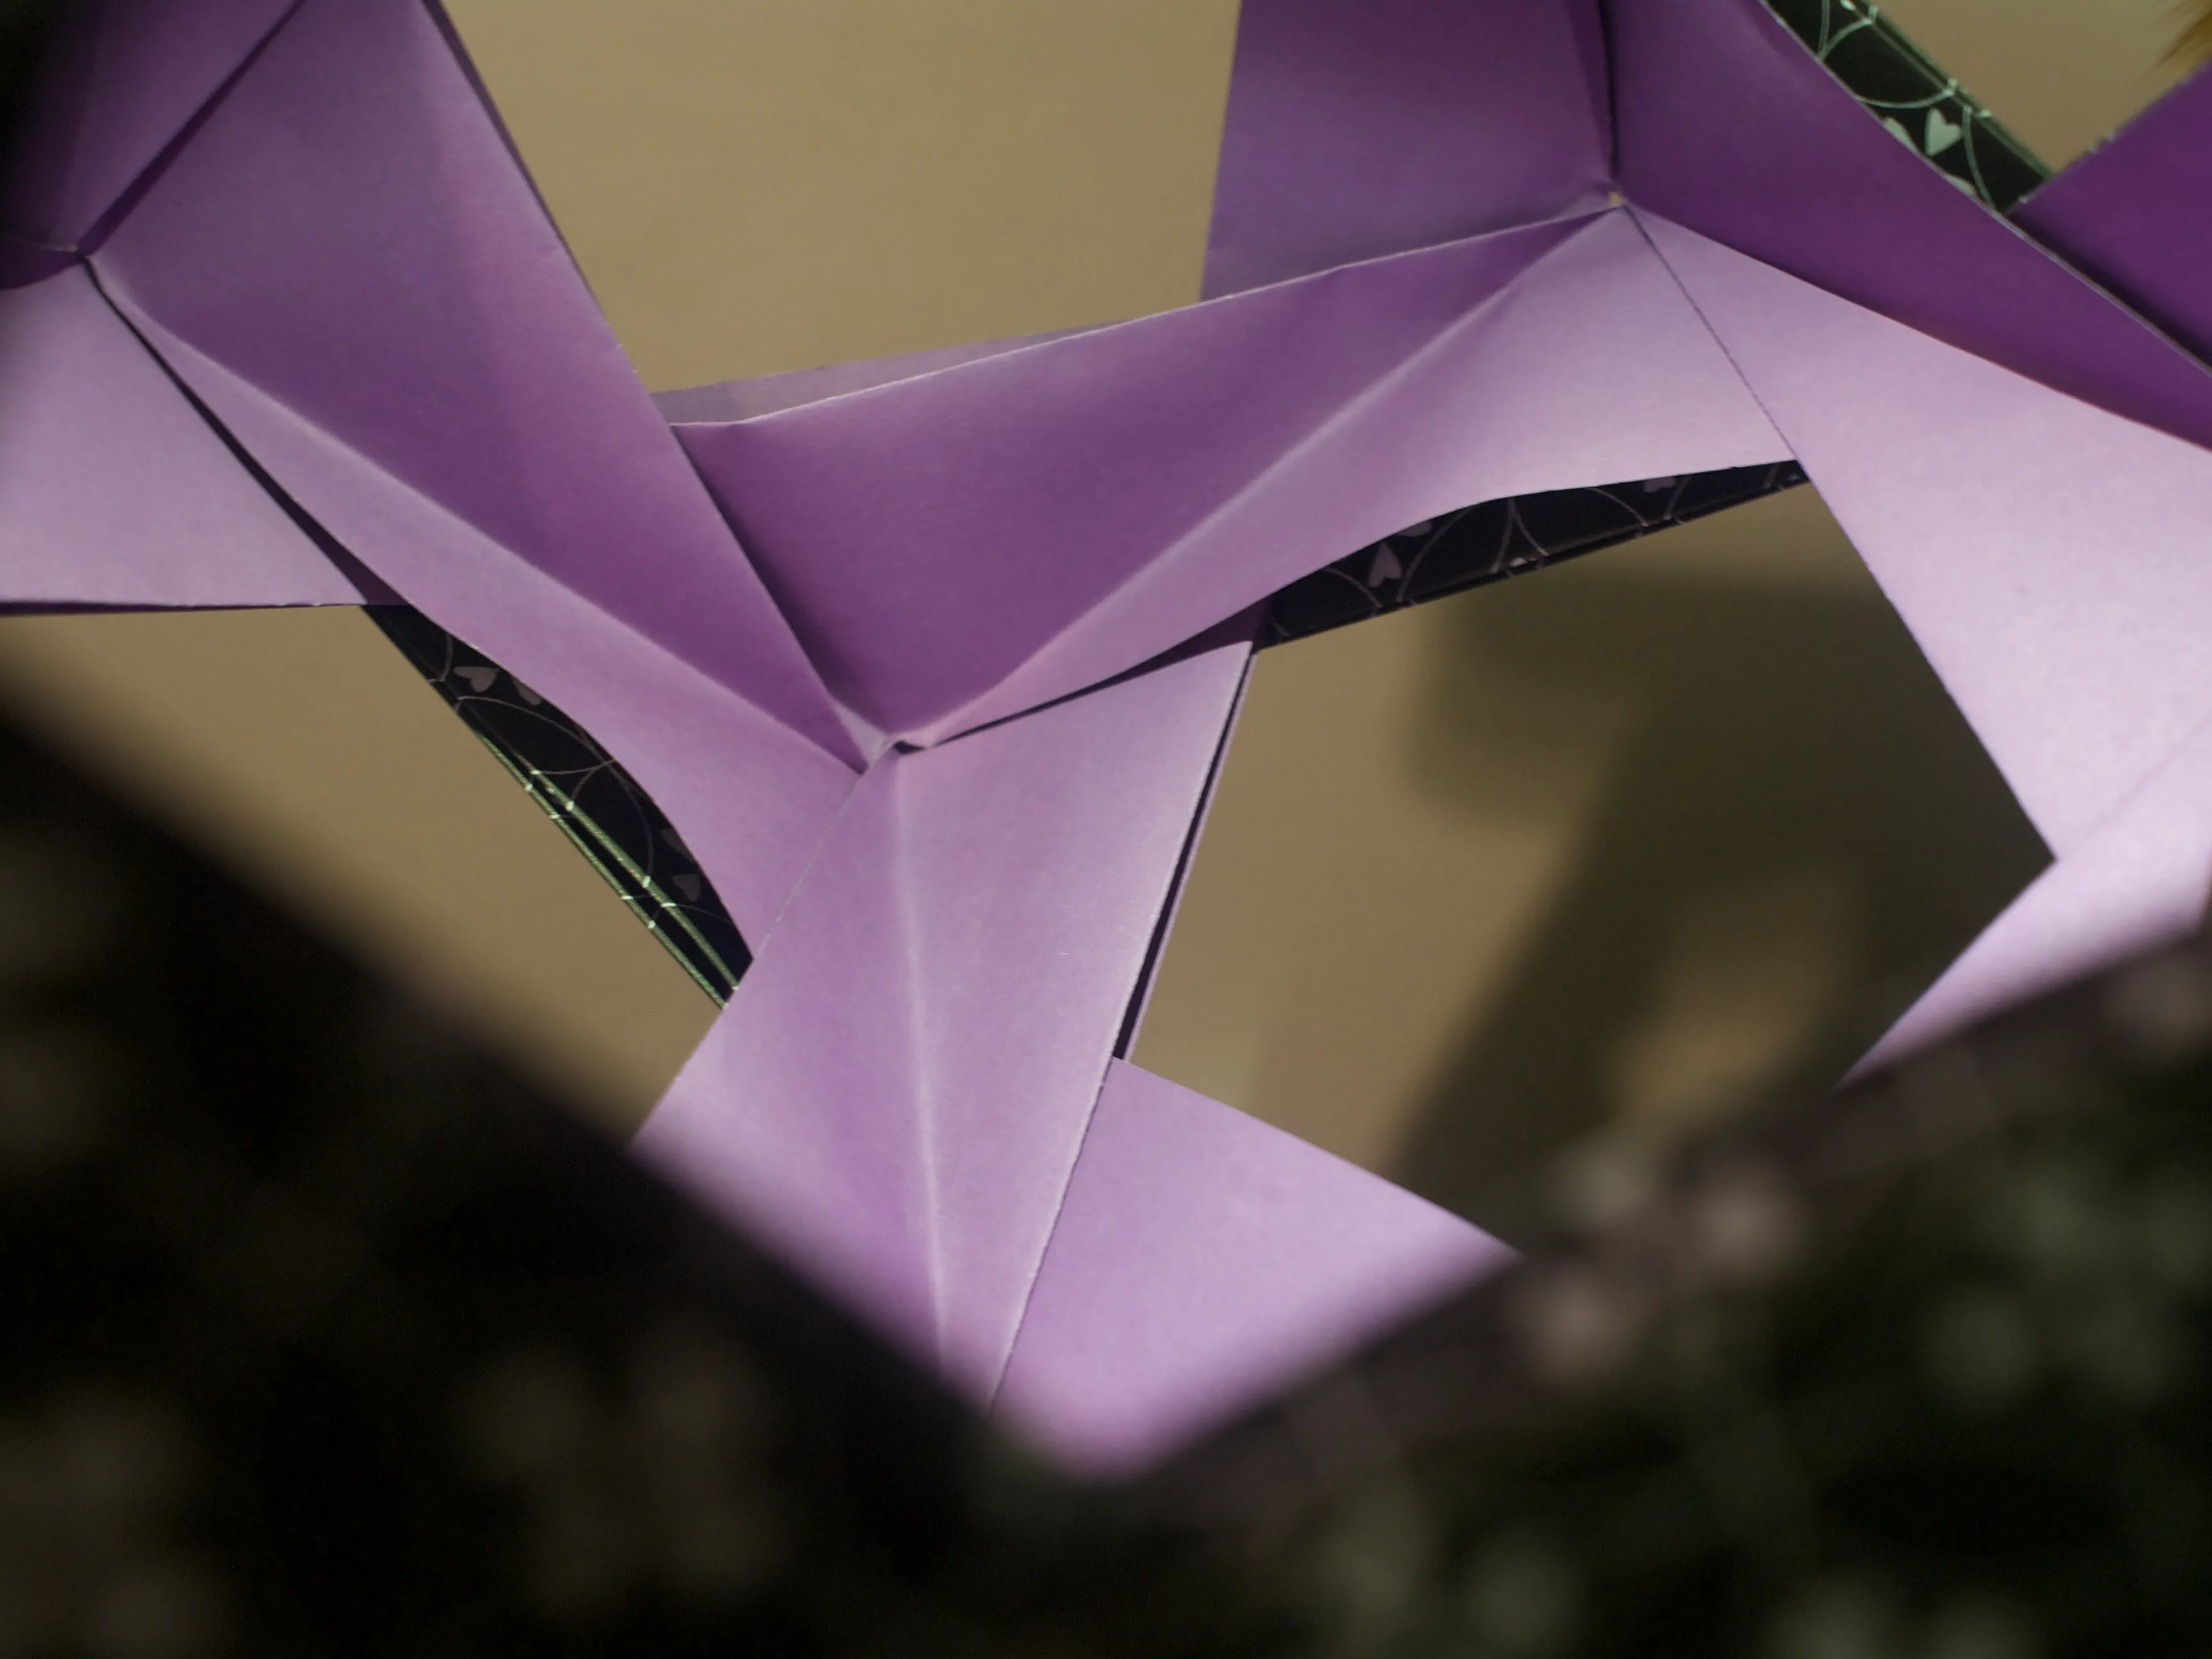 A close-up photo of the interior of an origami dodecahedral skeleton. The origami paper is solid purple on the inside and is black on the outside with a pattern of flowers and overlapping circles.